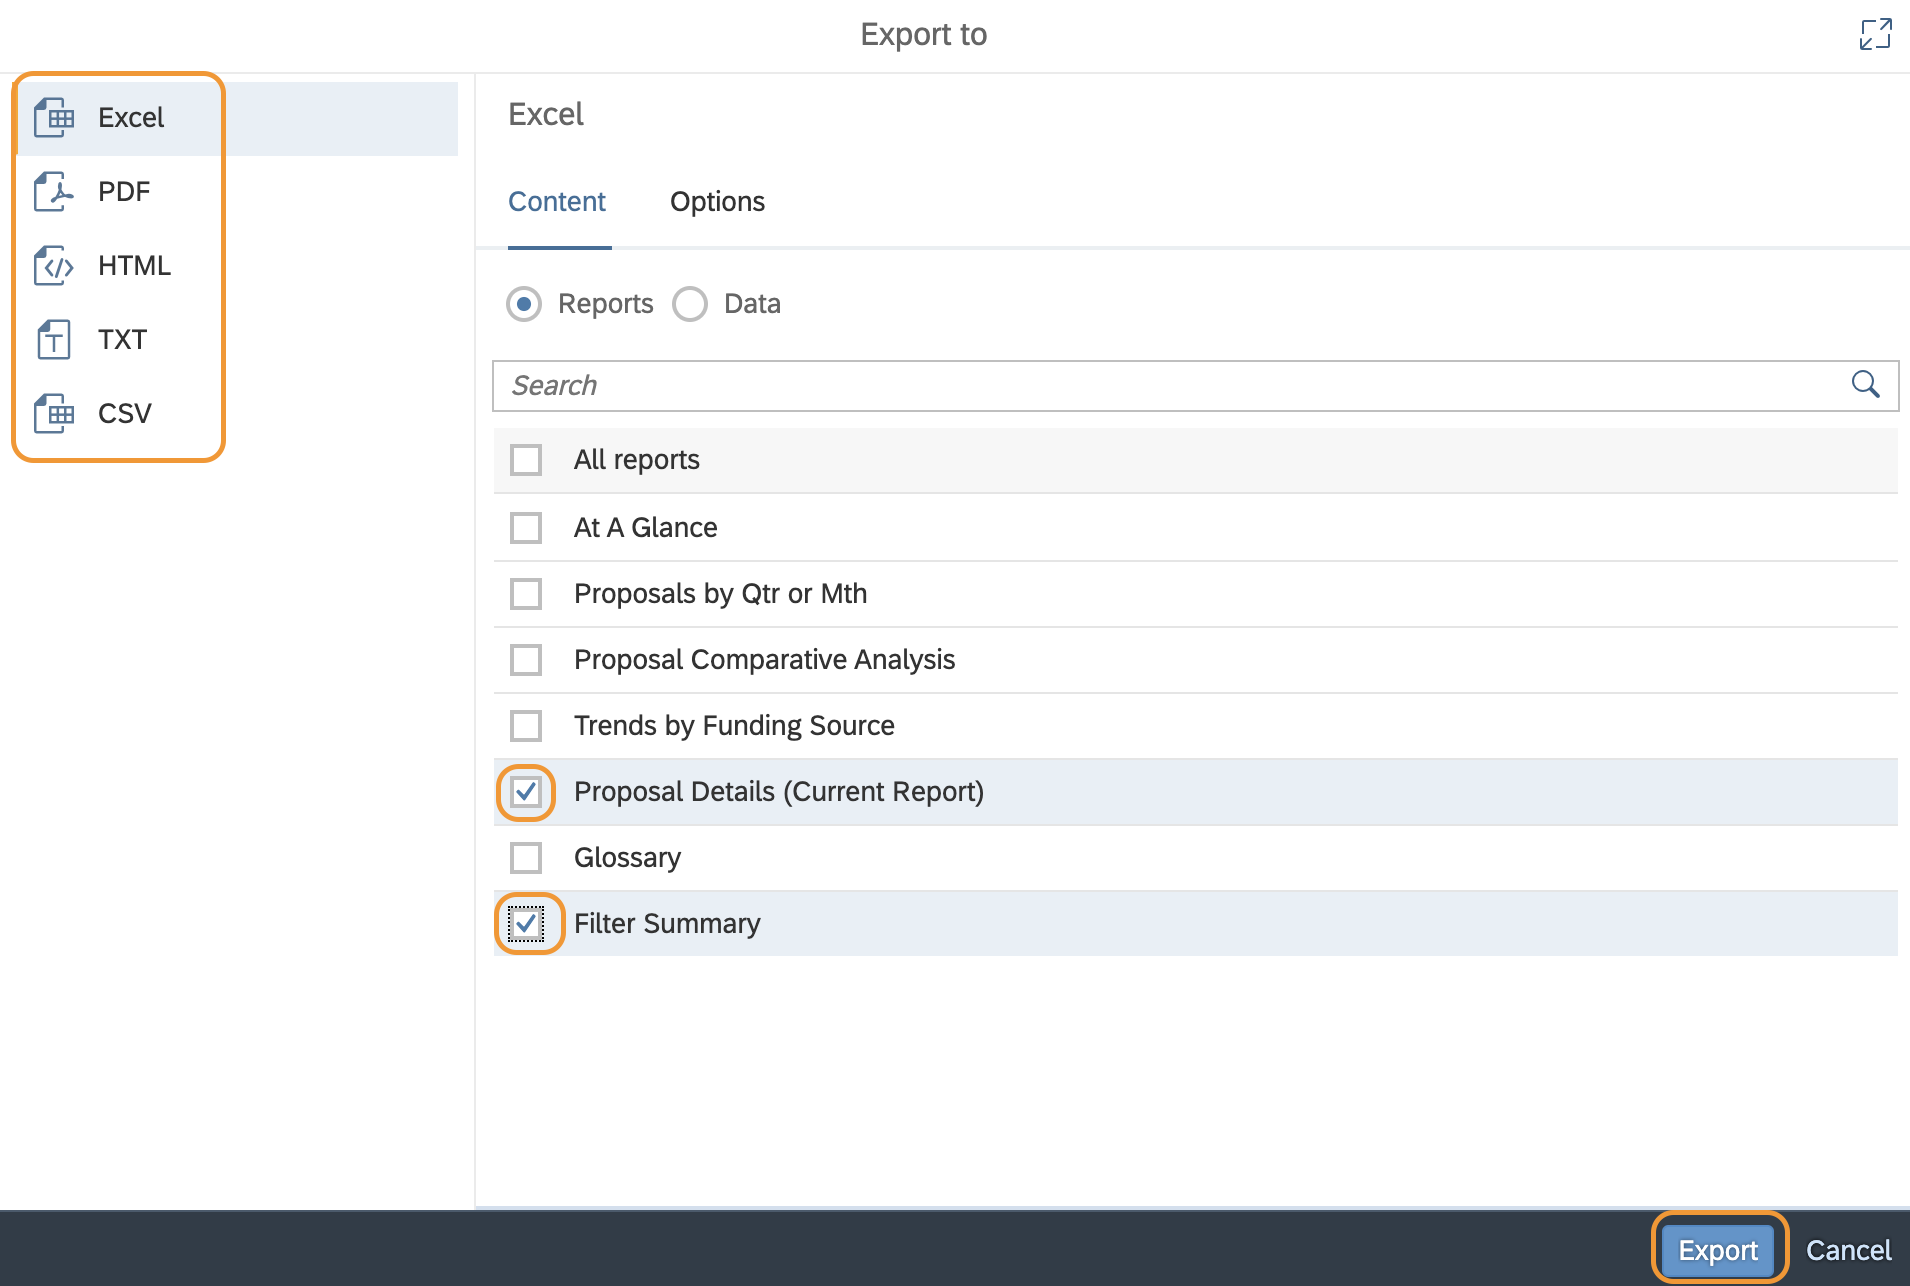 Export window with the file type list circled on the left, and the Proposal Summary Report and Filter Summary checkboxes circled in the main part of the page, as well as the Export button at the bottom.